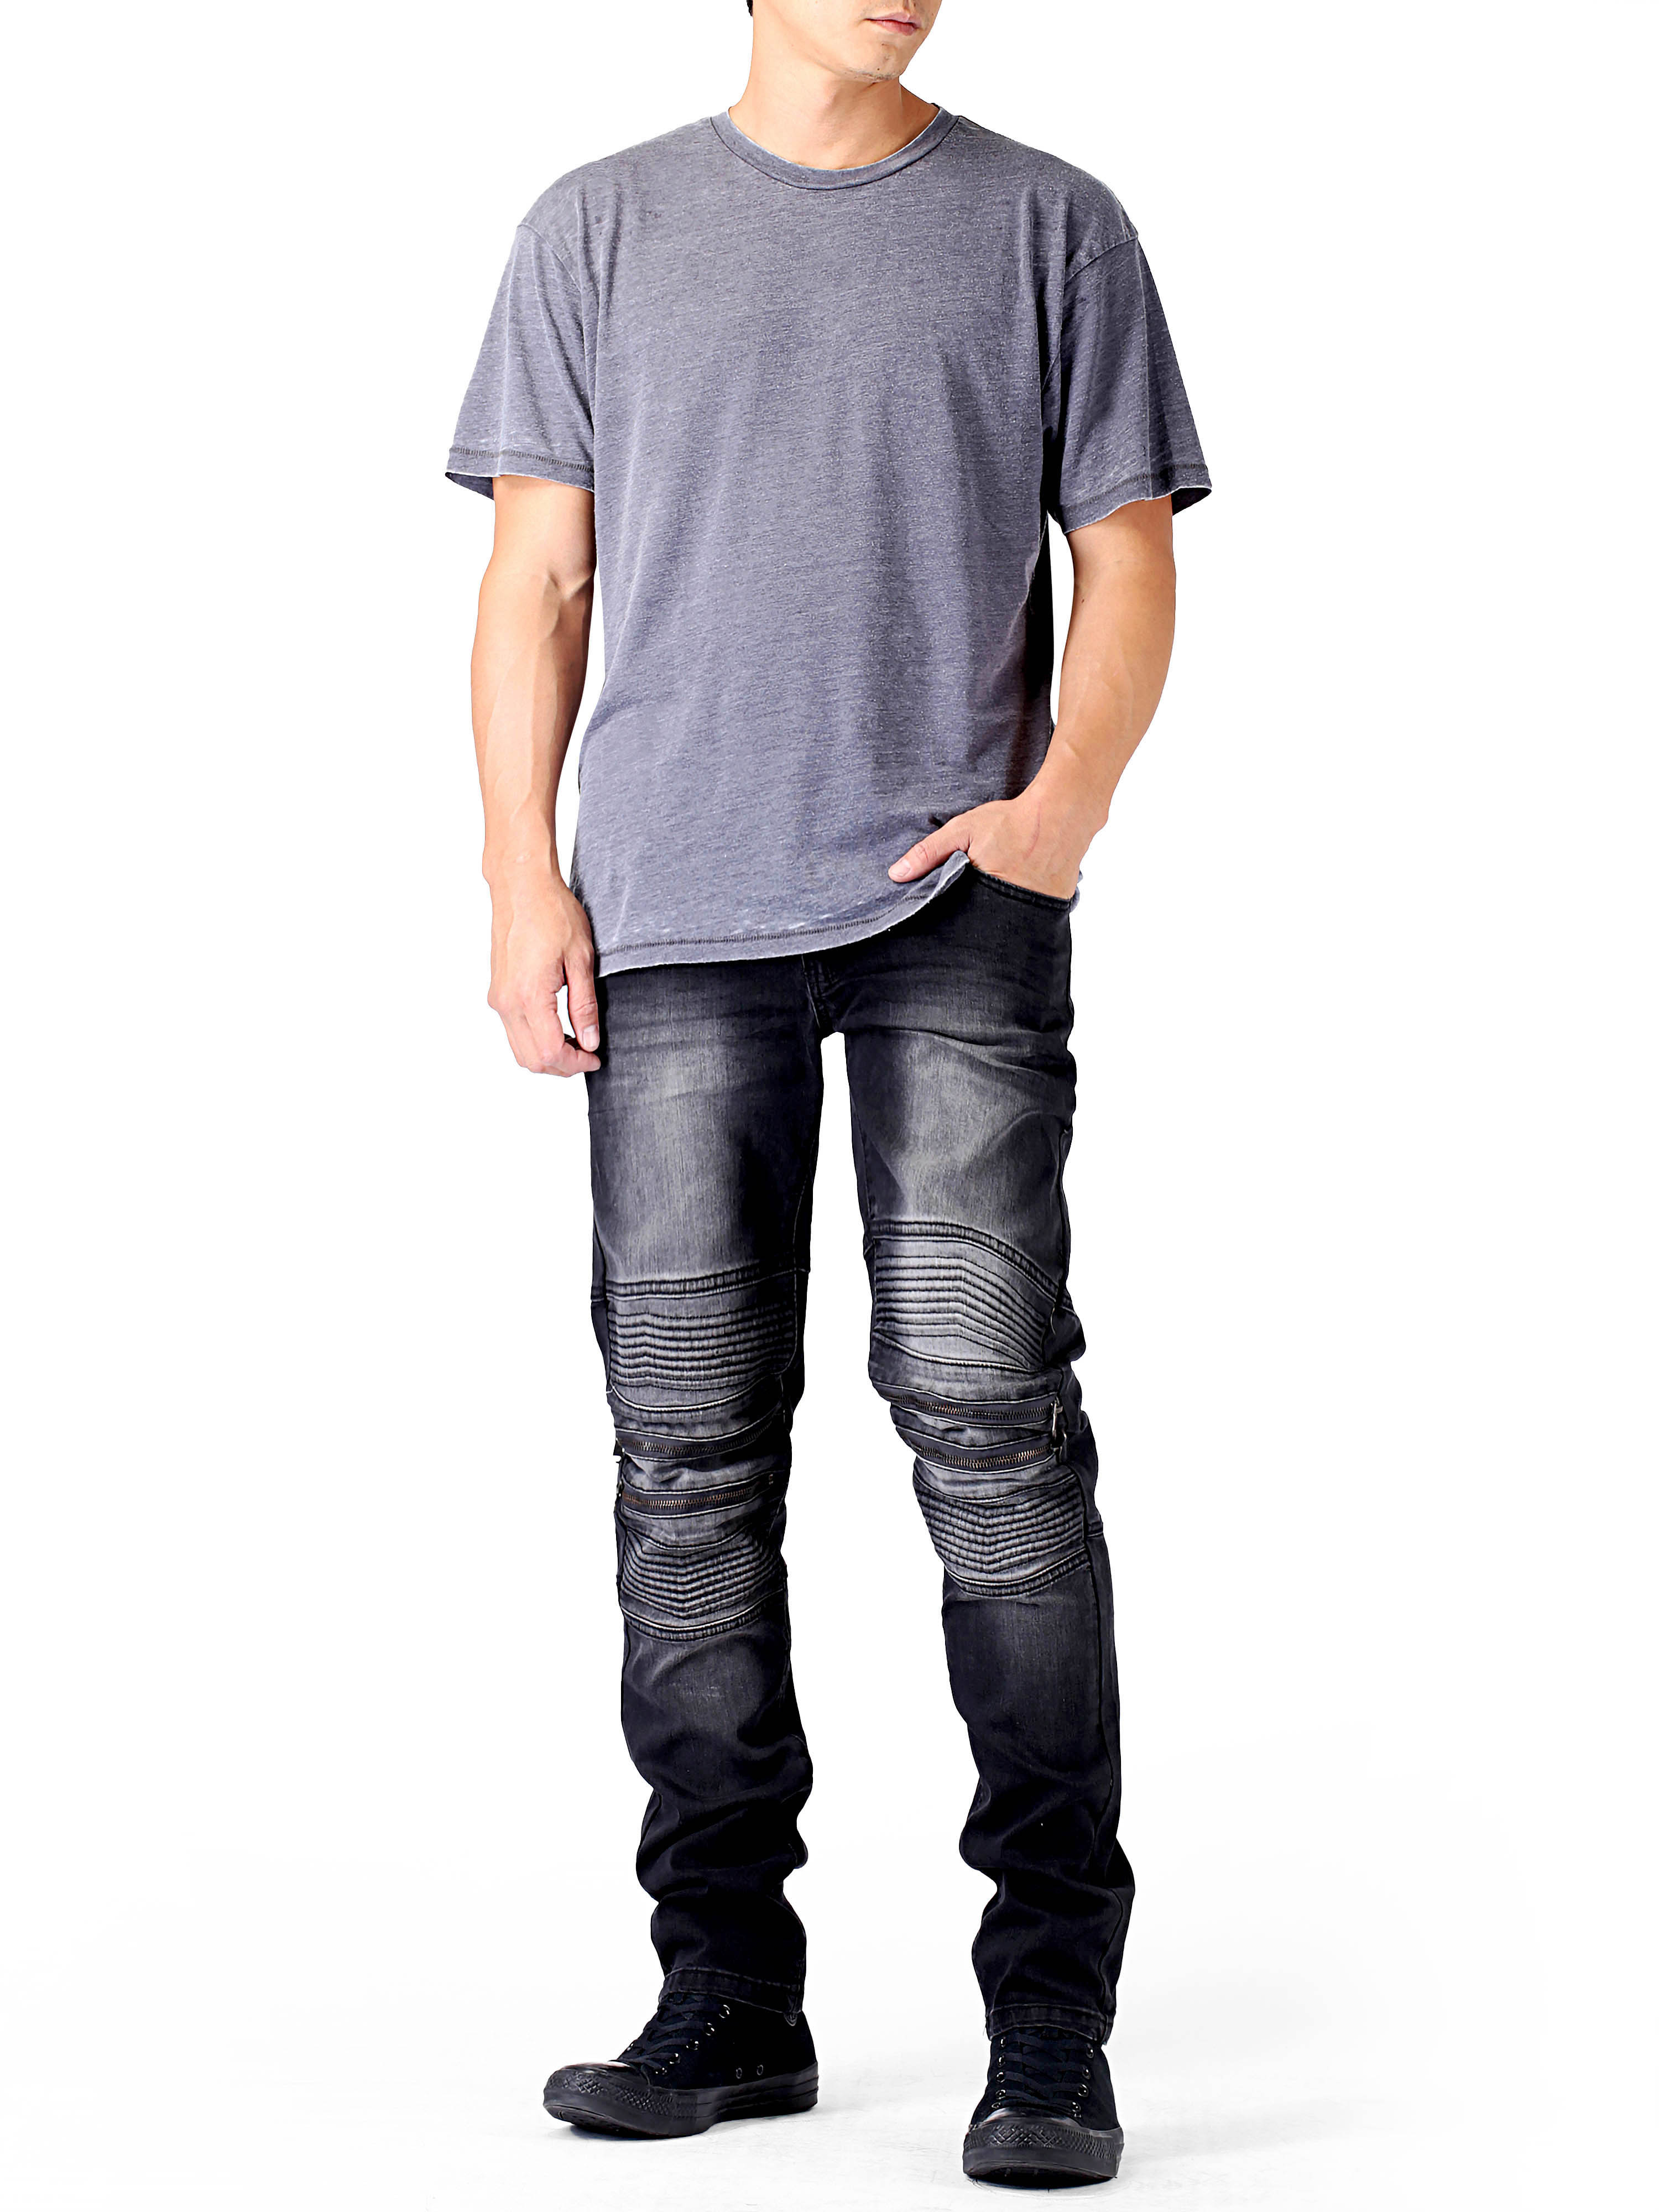 Ma Croix Mens Distressed Skinny Fit Denim Jeans with Zipper Pocket - image 2 of 6